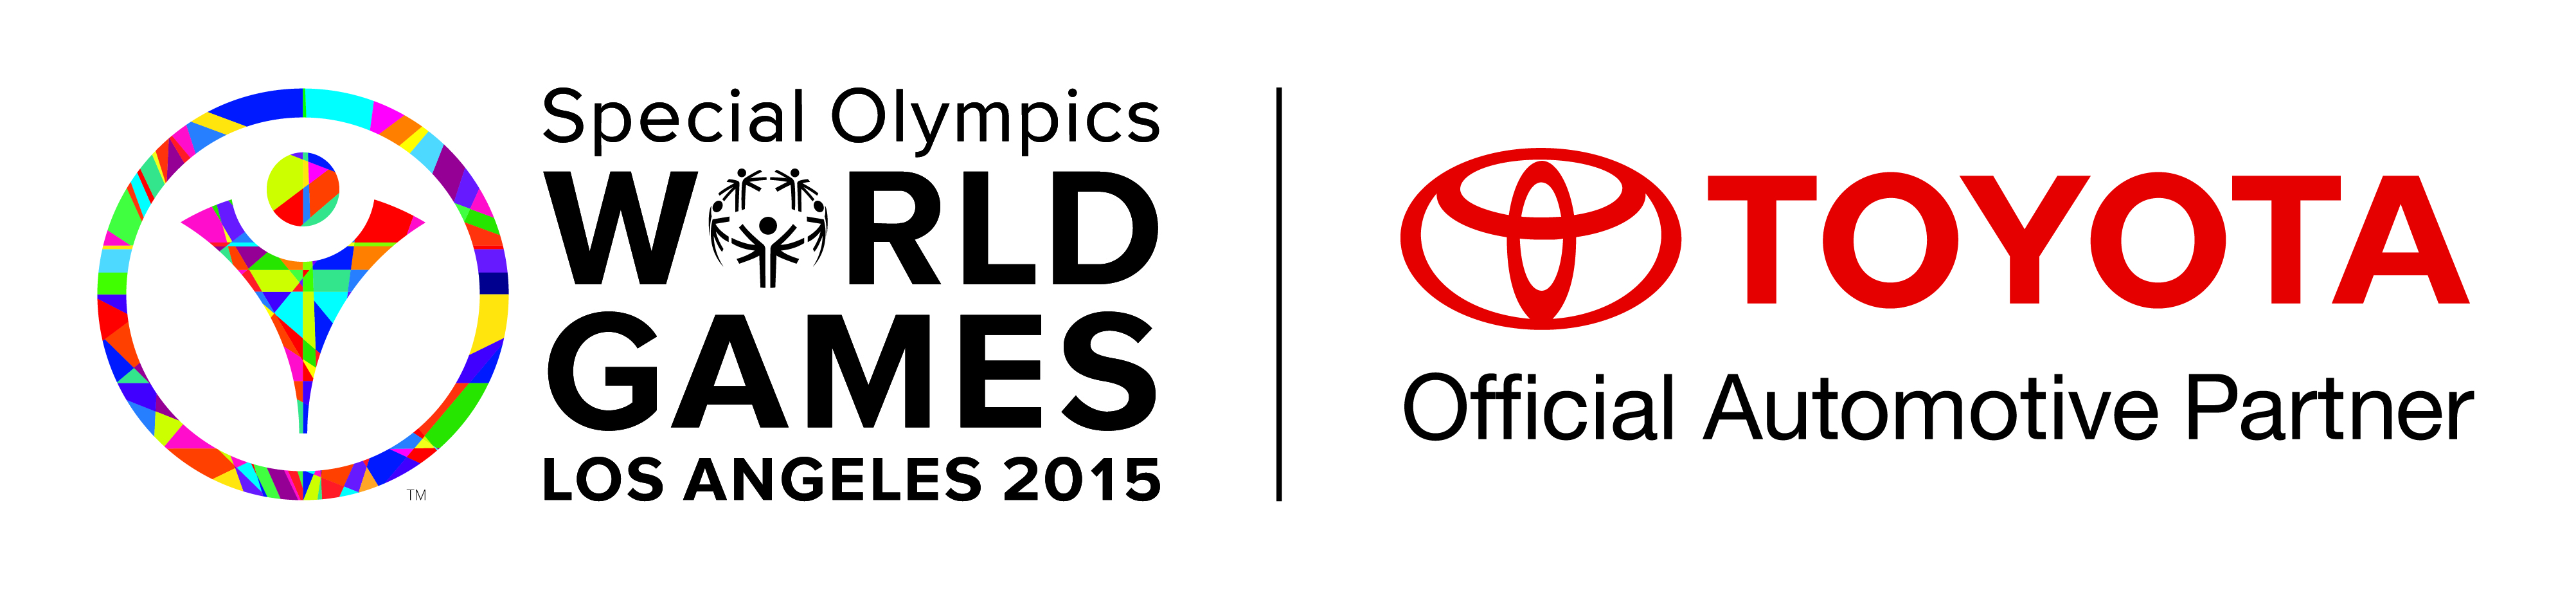 Toyota Share The Journey at the 2015 Special Olympics